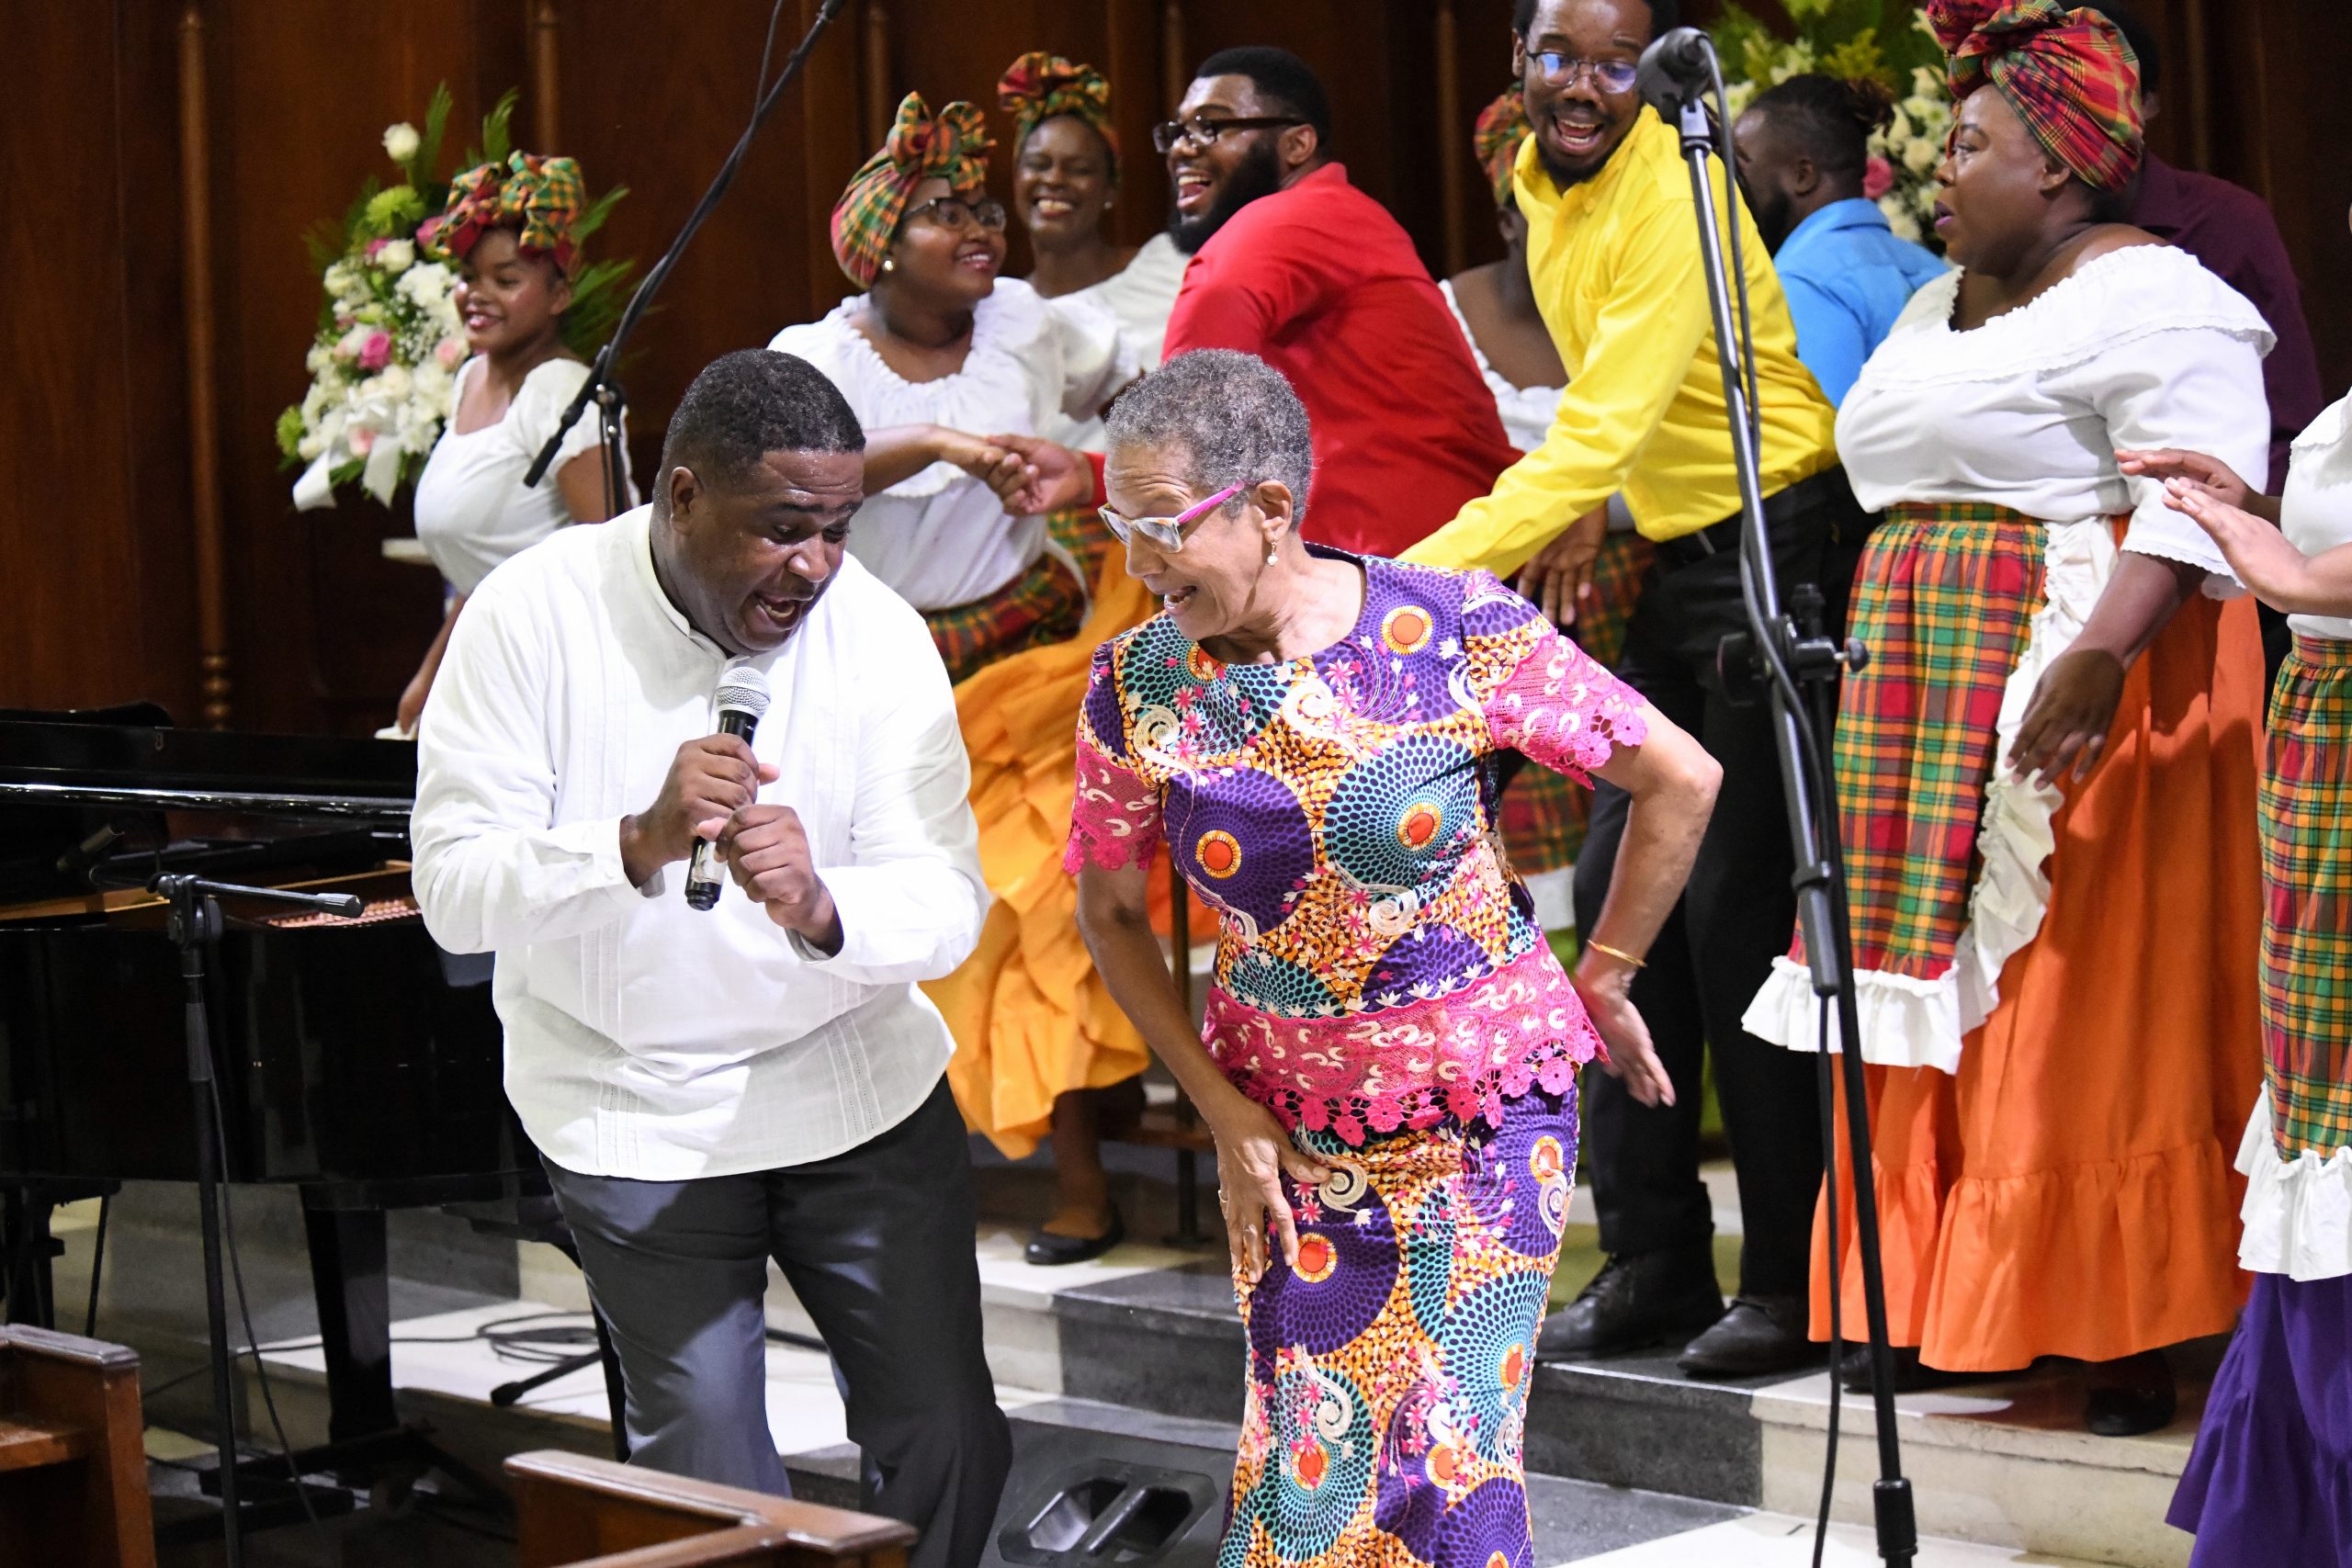 Master of ceremonies, Fae Ellington, does Gerreh with Hugh Douse of the Nexus Performing Arts Company during the group’s performance of “Miss Lou Medley”.